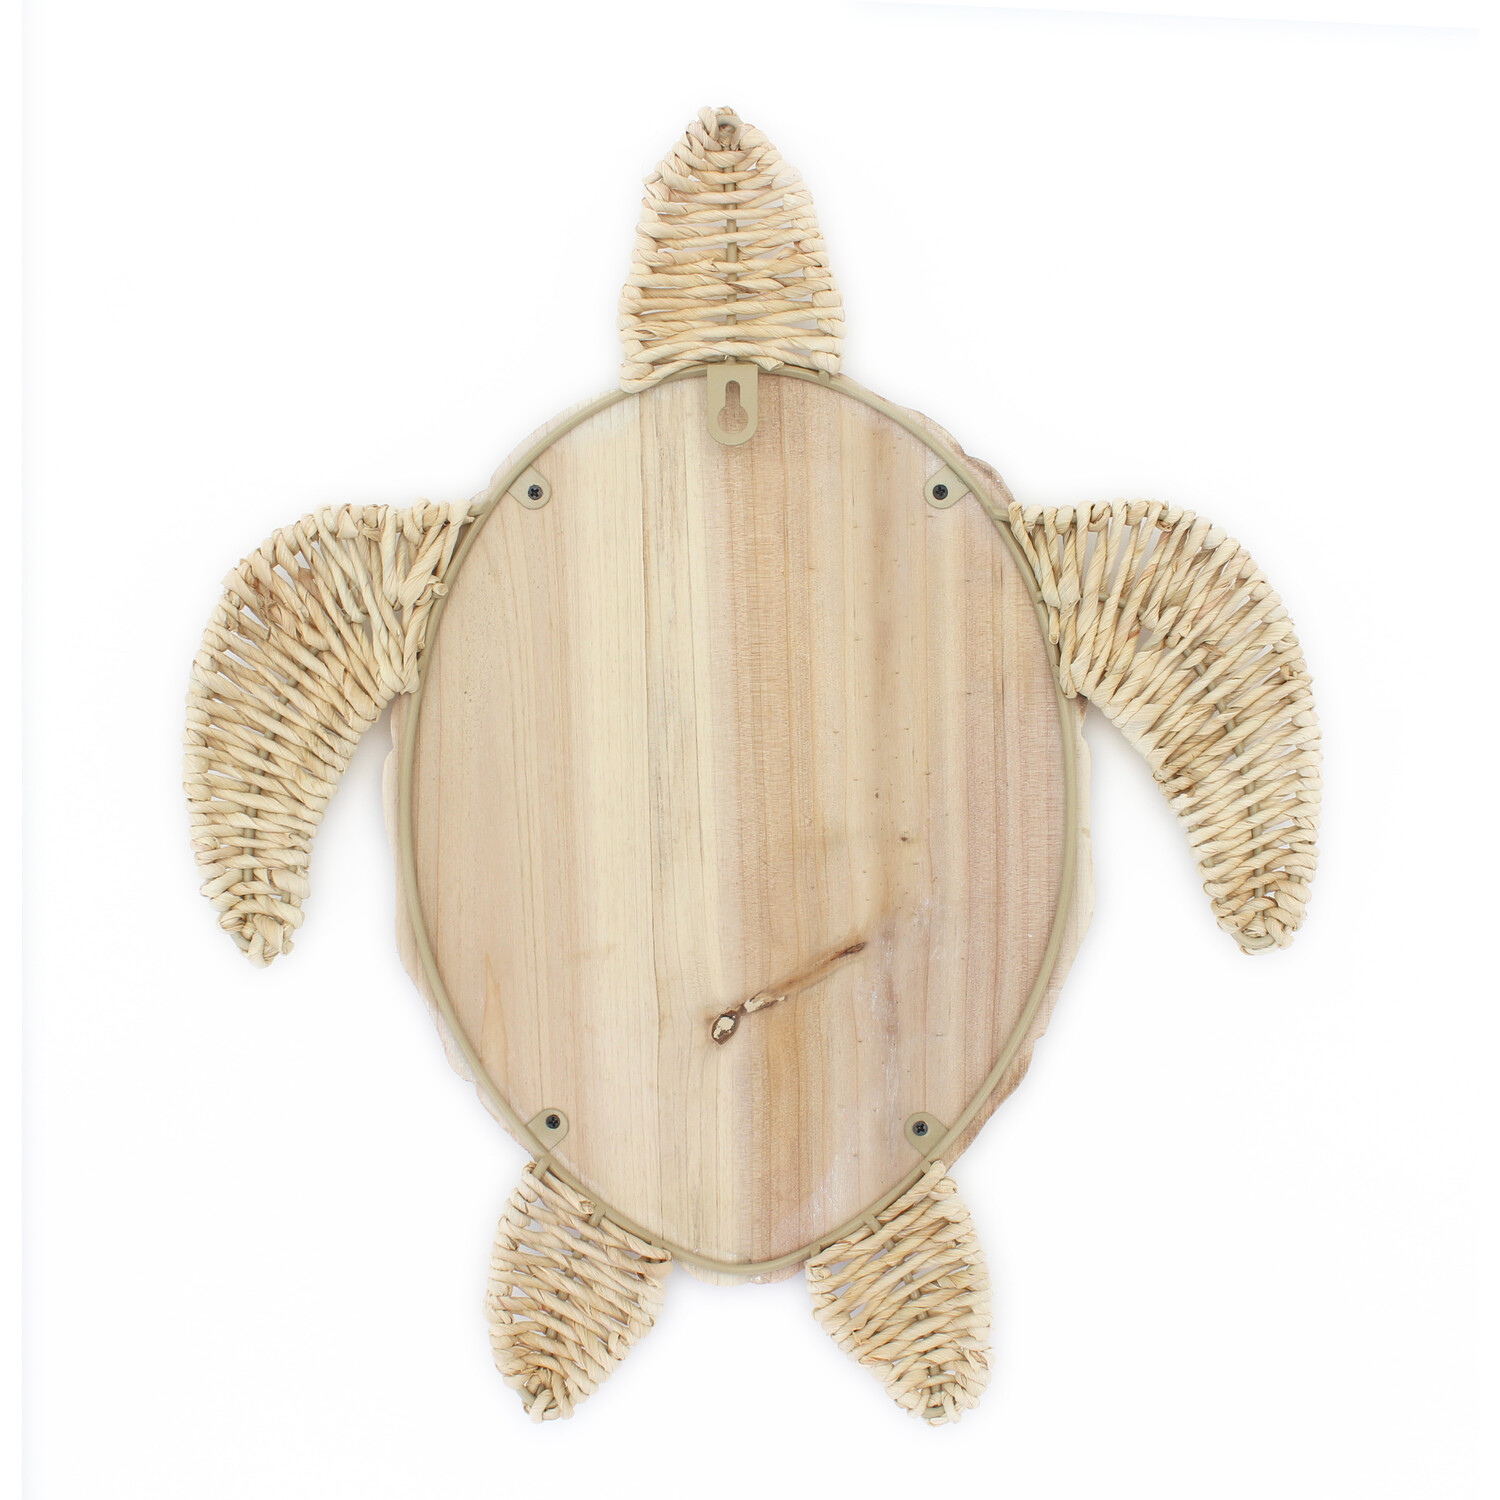 Tilly the Turtle Carved Wooden Art - Natural Image 3